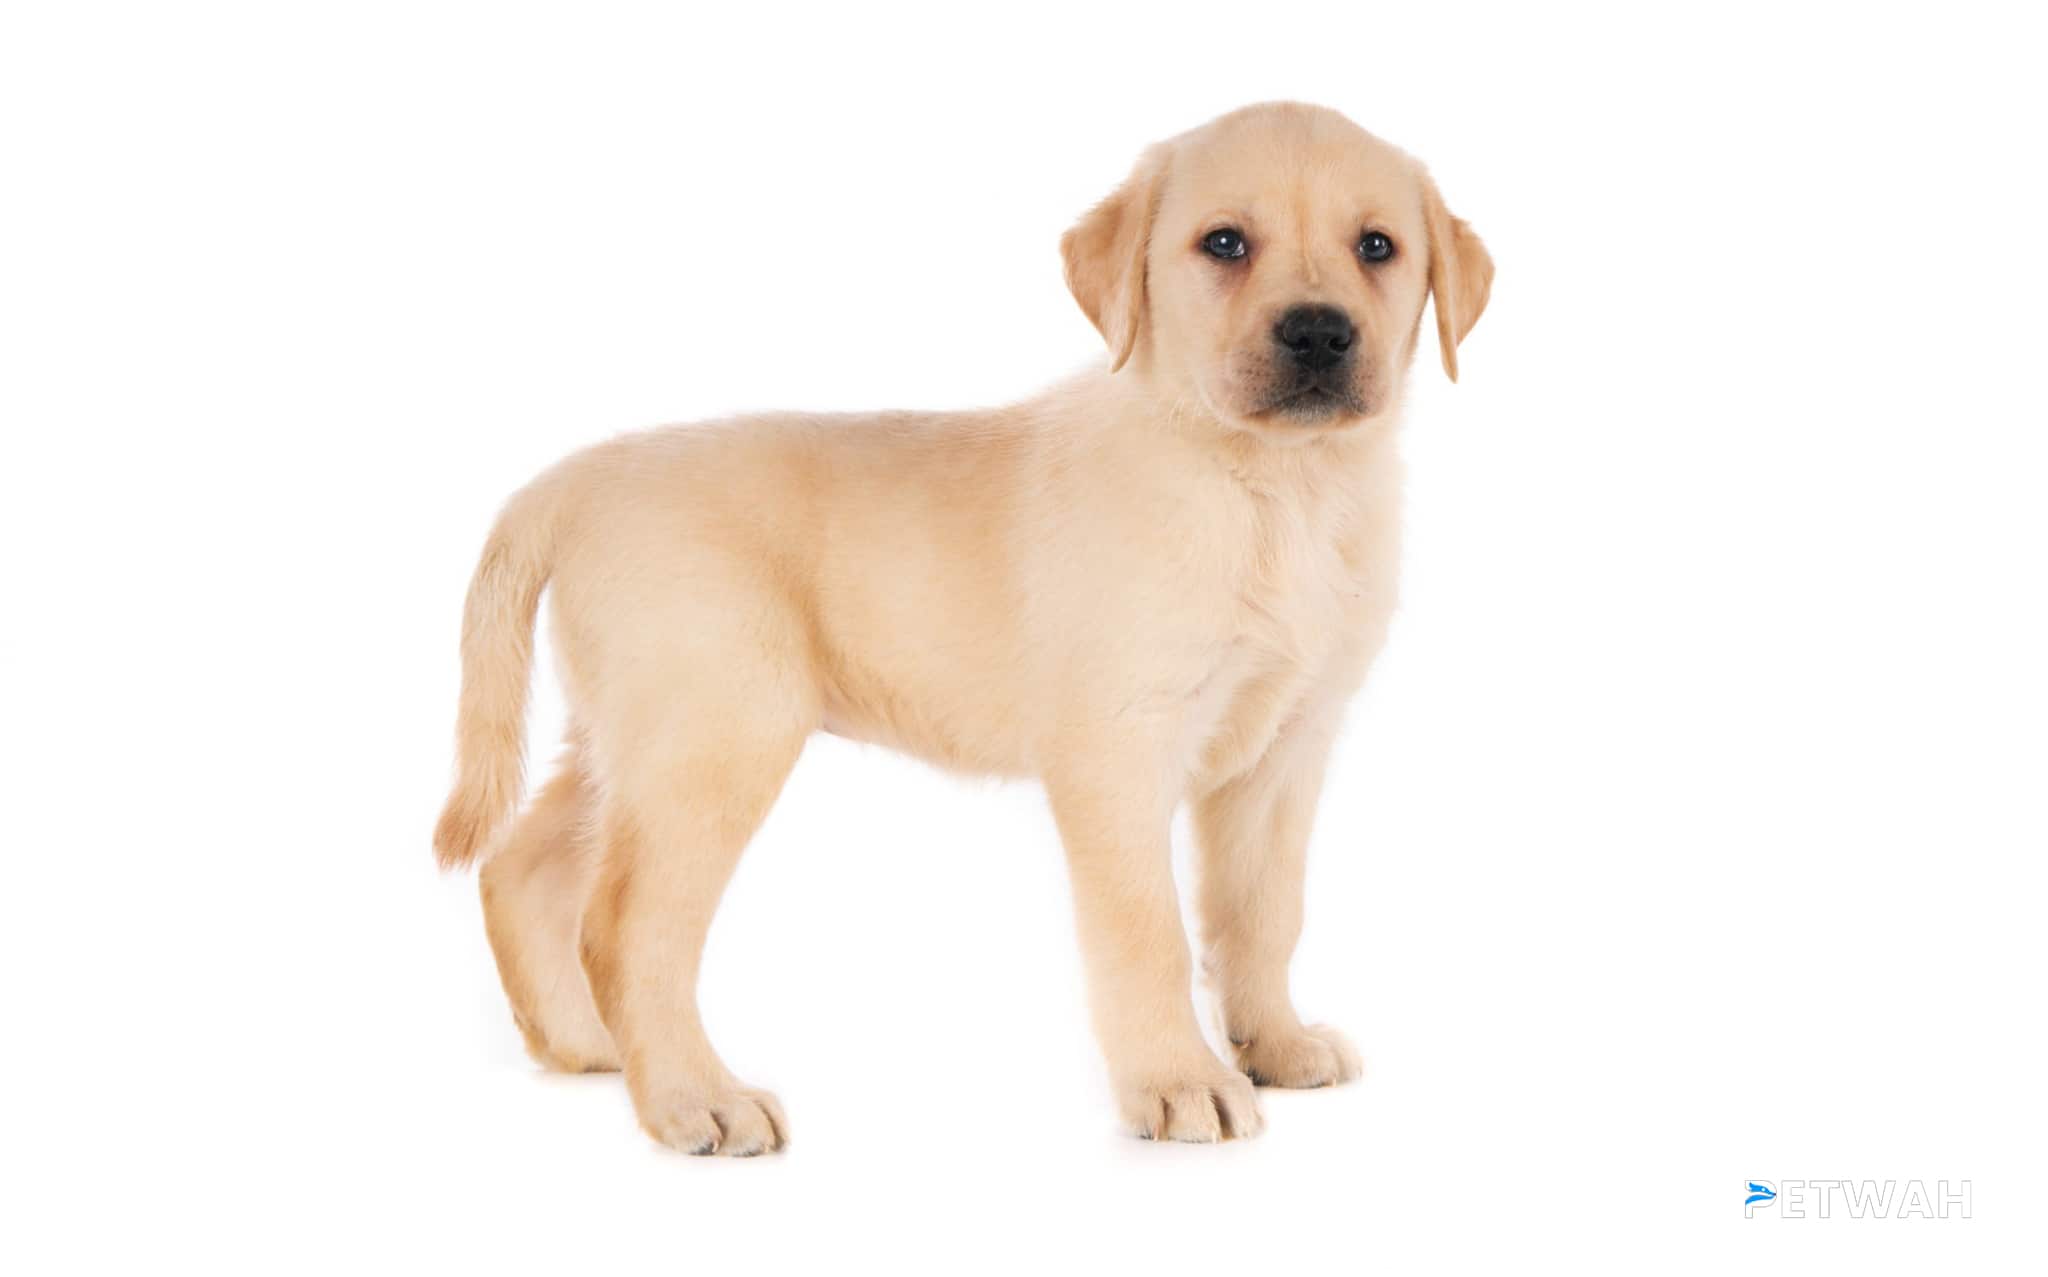 Signs of Inadequate Exercise in Labrador Puppies